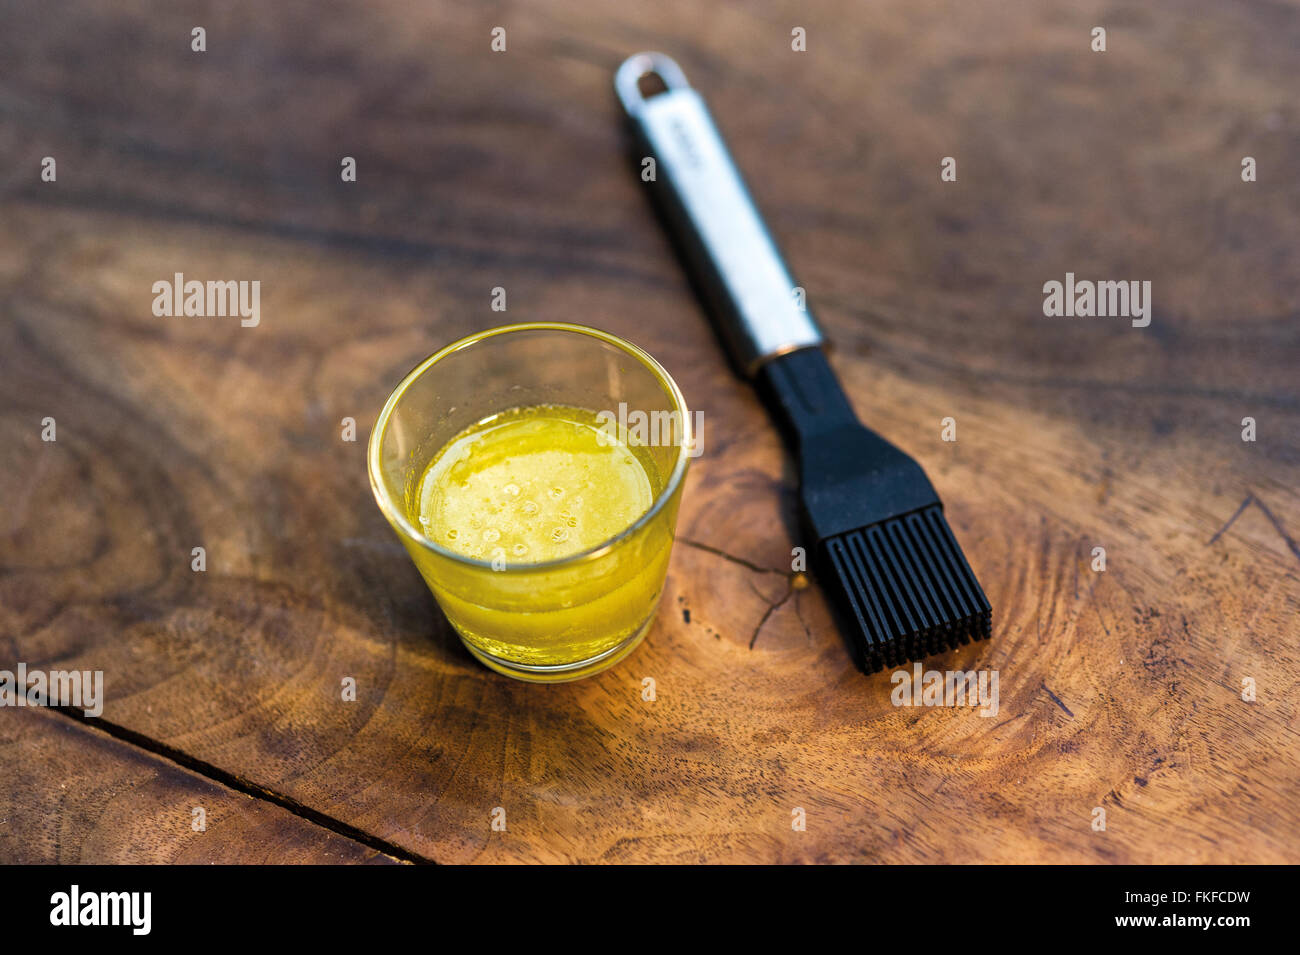 https://c8.alamy.com/comp/FKFCDW/oil-and-a-silicon-brush-FKFCDW.jpg